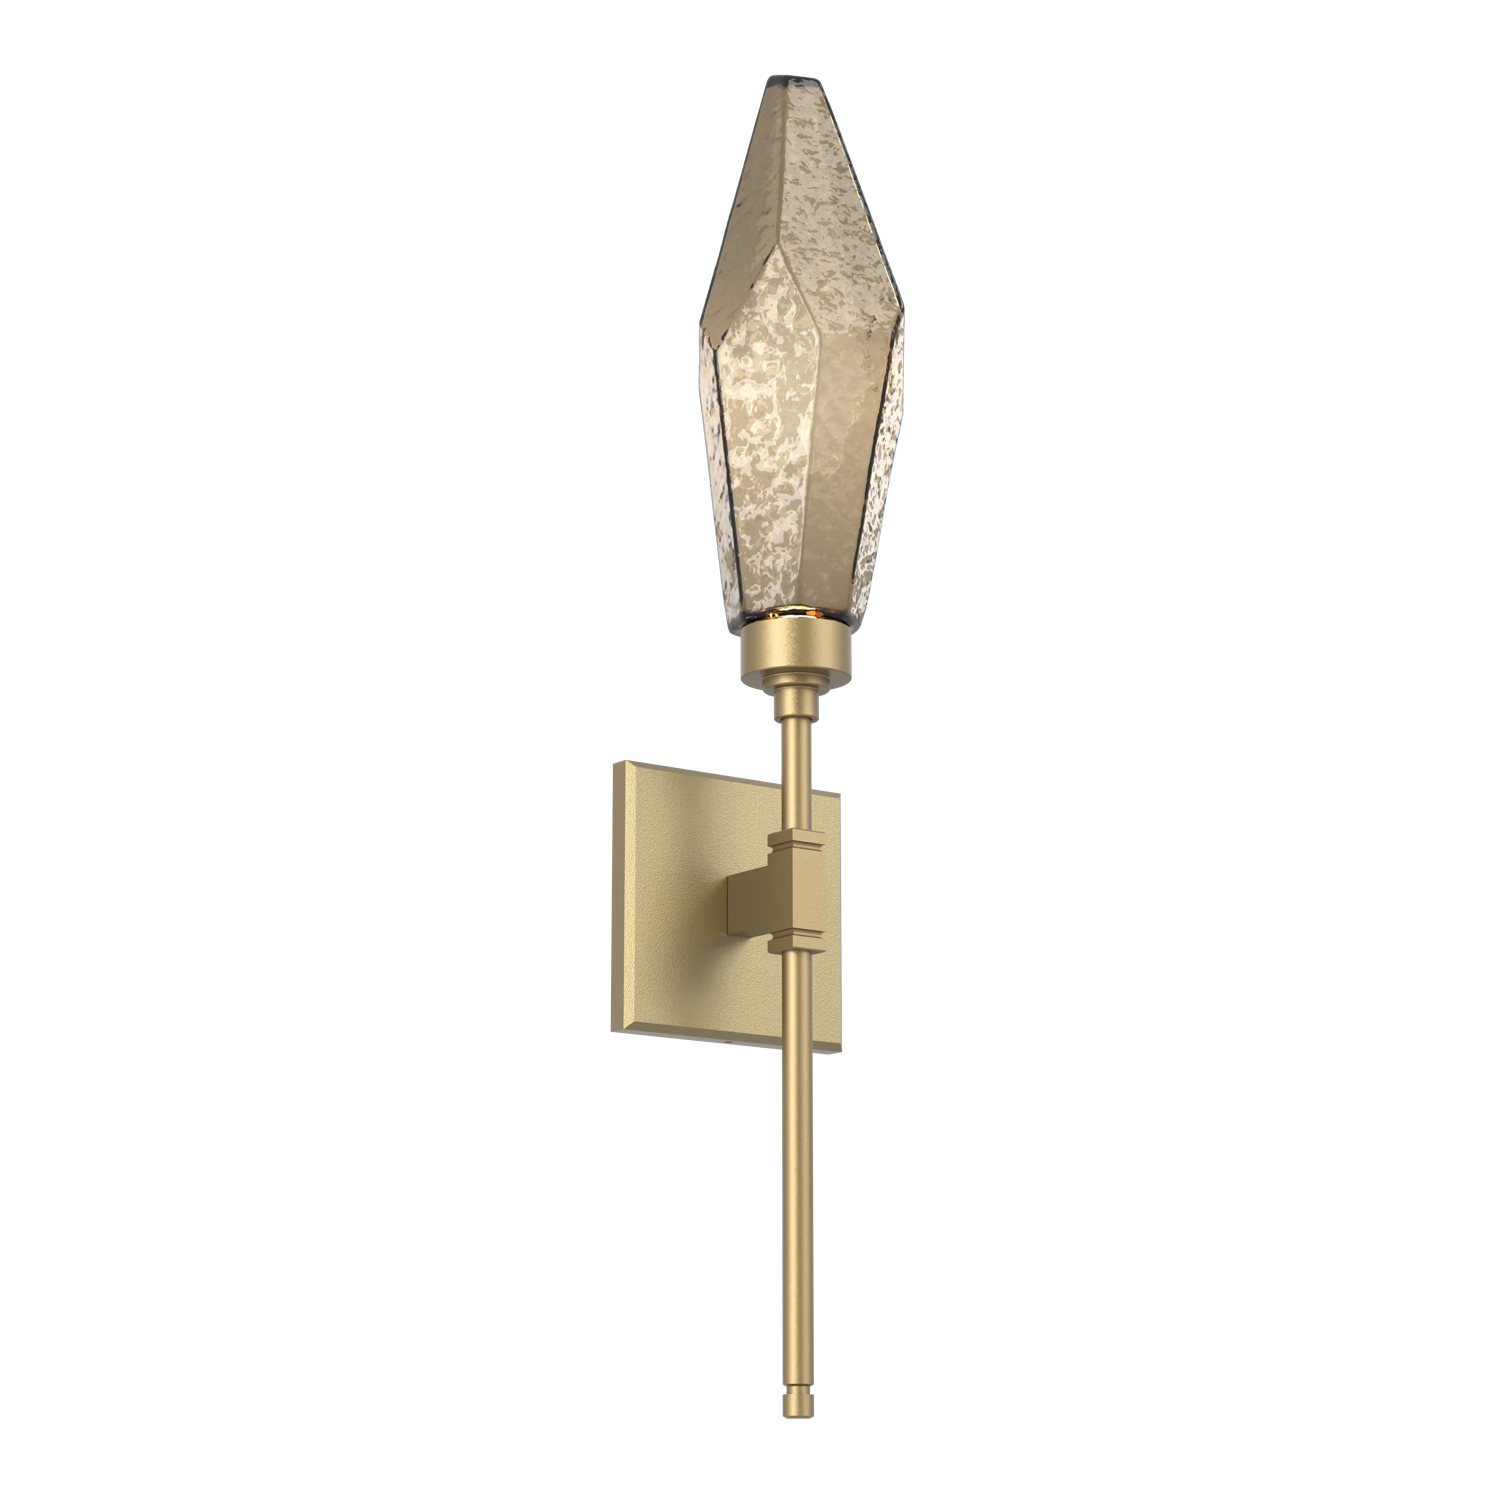 IDB0050-04-GB-CB-Hammerton-Studio-Rock-Crystal-ada-certified-belvedere-wall-sconce-with-gilded-brass-finish-and-chilled-bronze-blown-glass-shades-and-LED-lamping